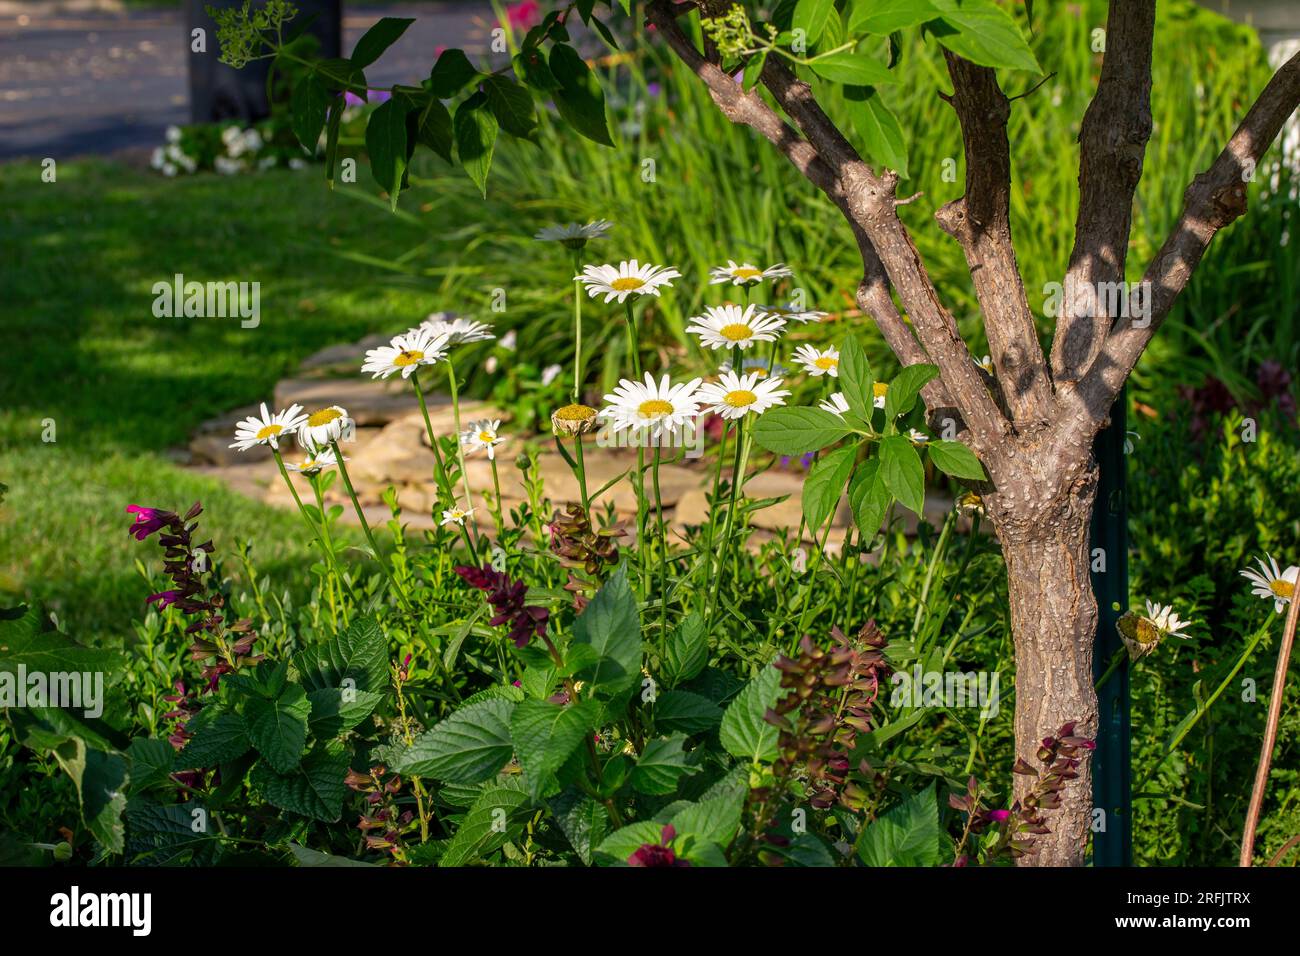 Close up texture view of a beautiful colorful garden featuring a small ornamental tree and white daisies Stock Photo